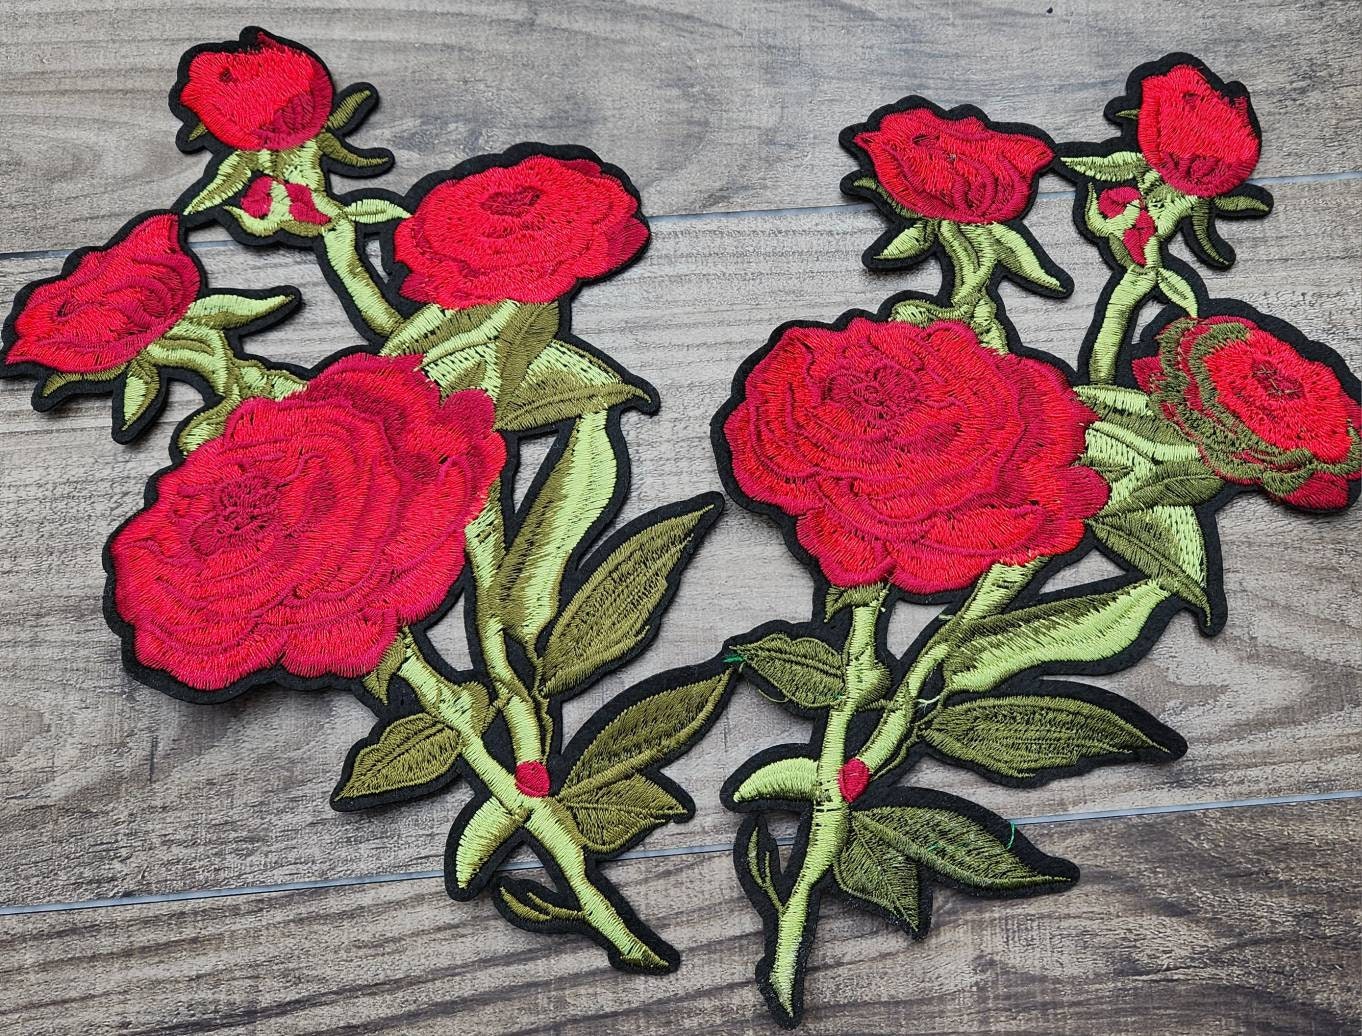 Red Heart Iron on or Sew on Patch 2 pcs